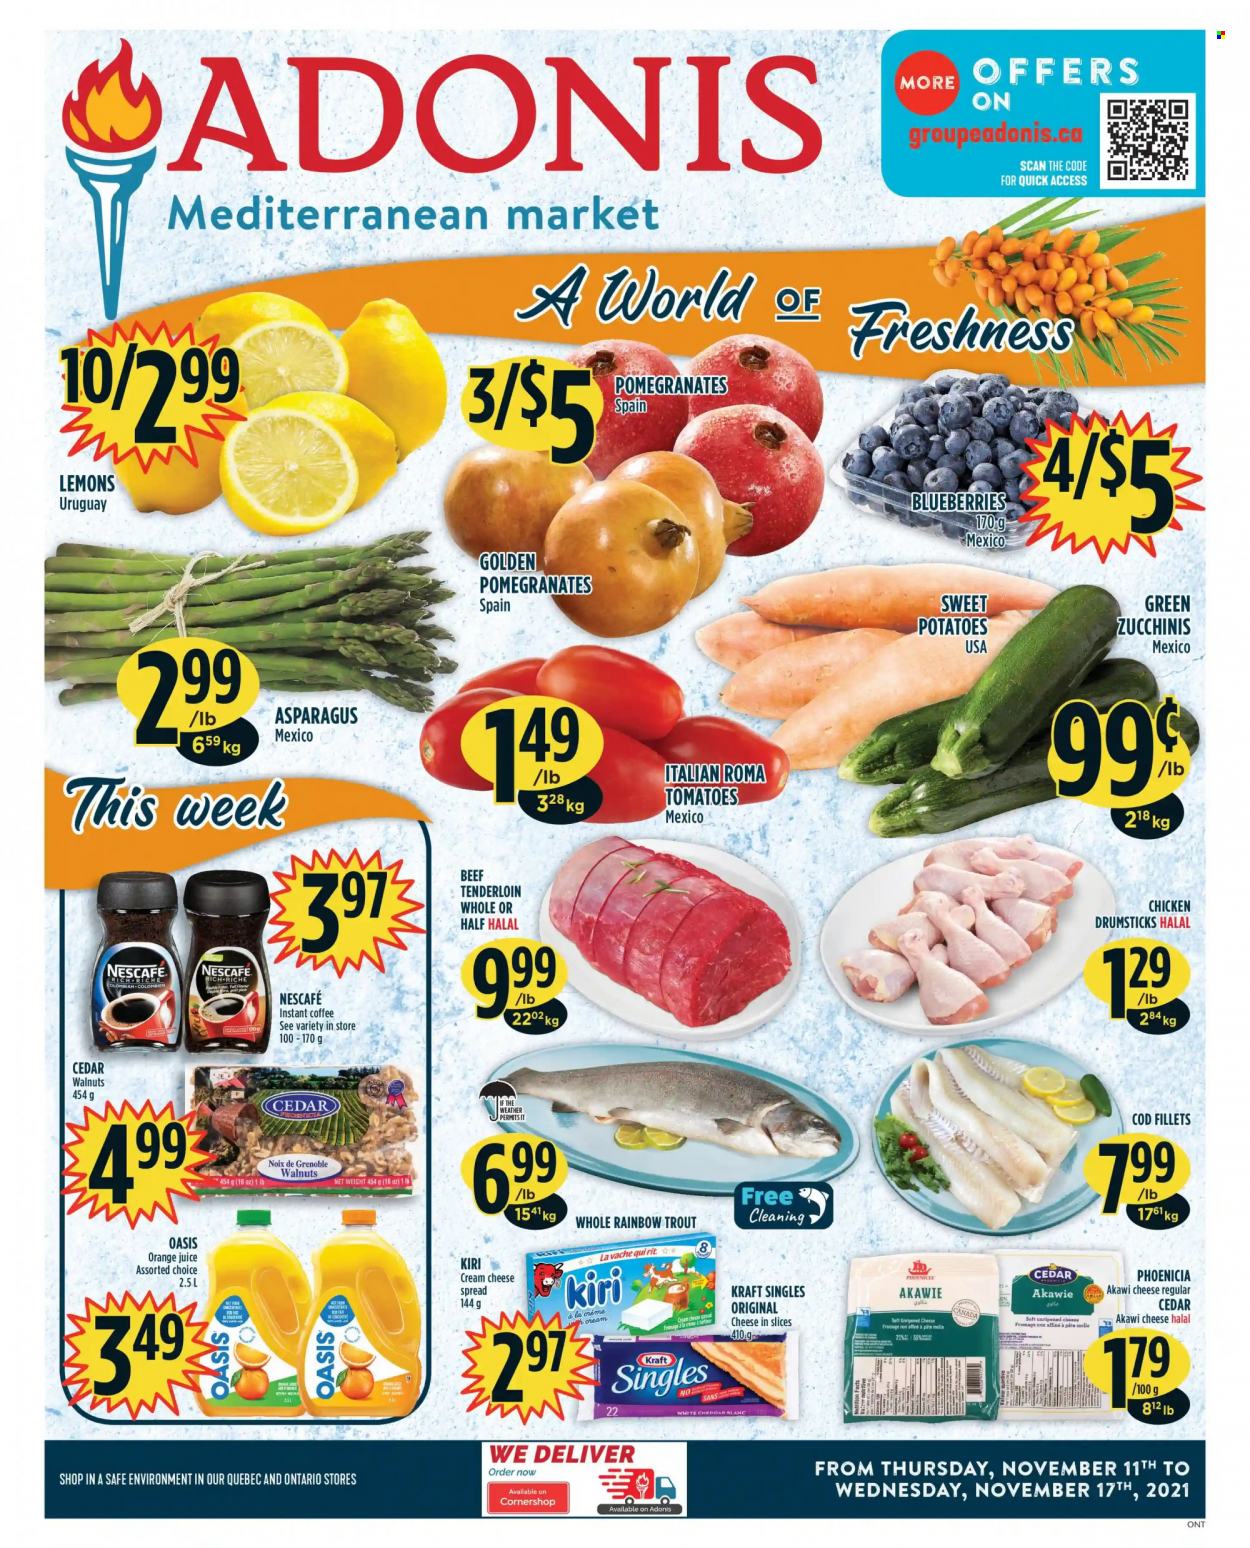 thumbnail - Adonis Flyer - November 11, 2021 - November 17, 2021 - Sales products - sweet potato, tomatoes, potatoes, blueberries, pomegranate, lemons, cod, trout, Kraft®, cheese spread, cream cheese, sandwich slices, cheddar, Kiri, The Laughing Cow, Kraft Singles, walnuts, orange juice, juice, instant coffee, chicken drumsticks, chicken, beef meat, beef tenderloin, Nescafé. Page 1.